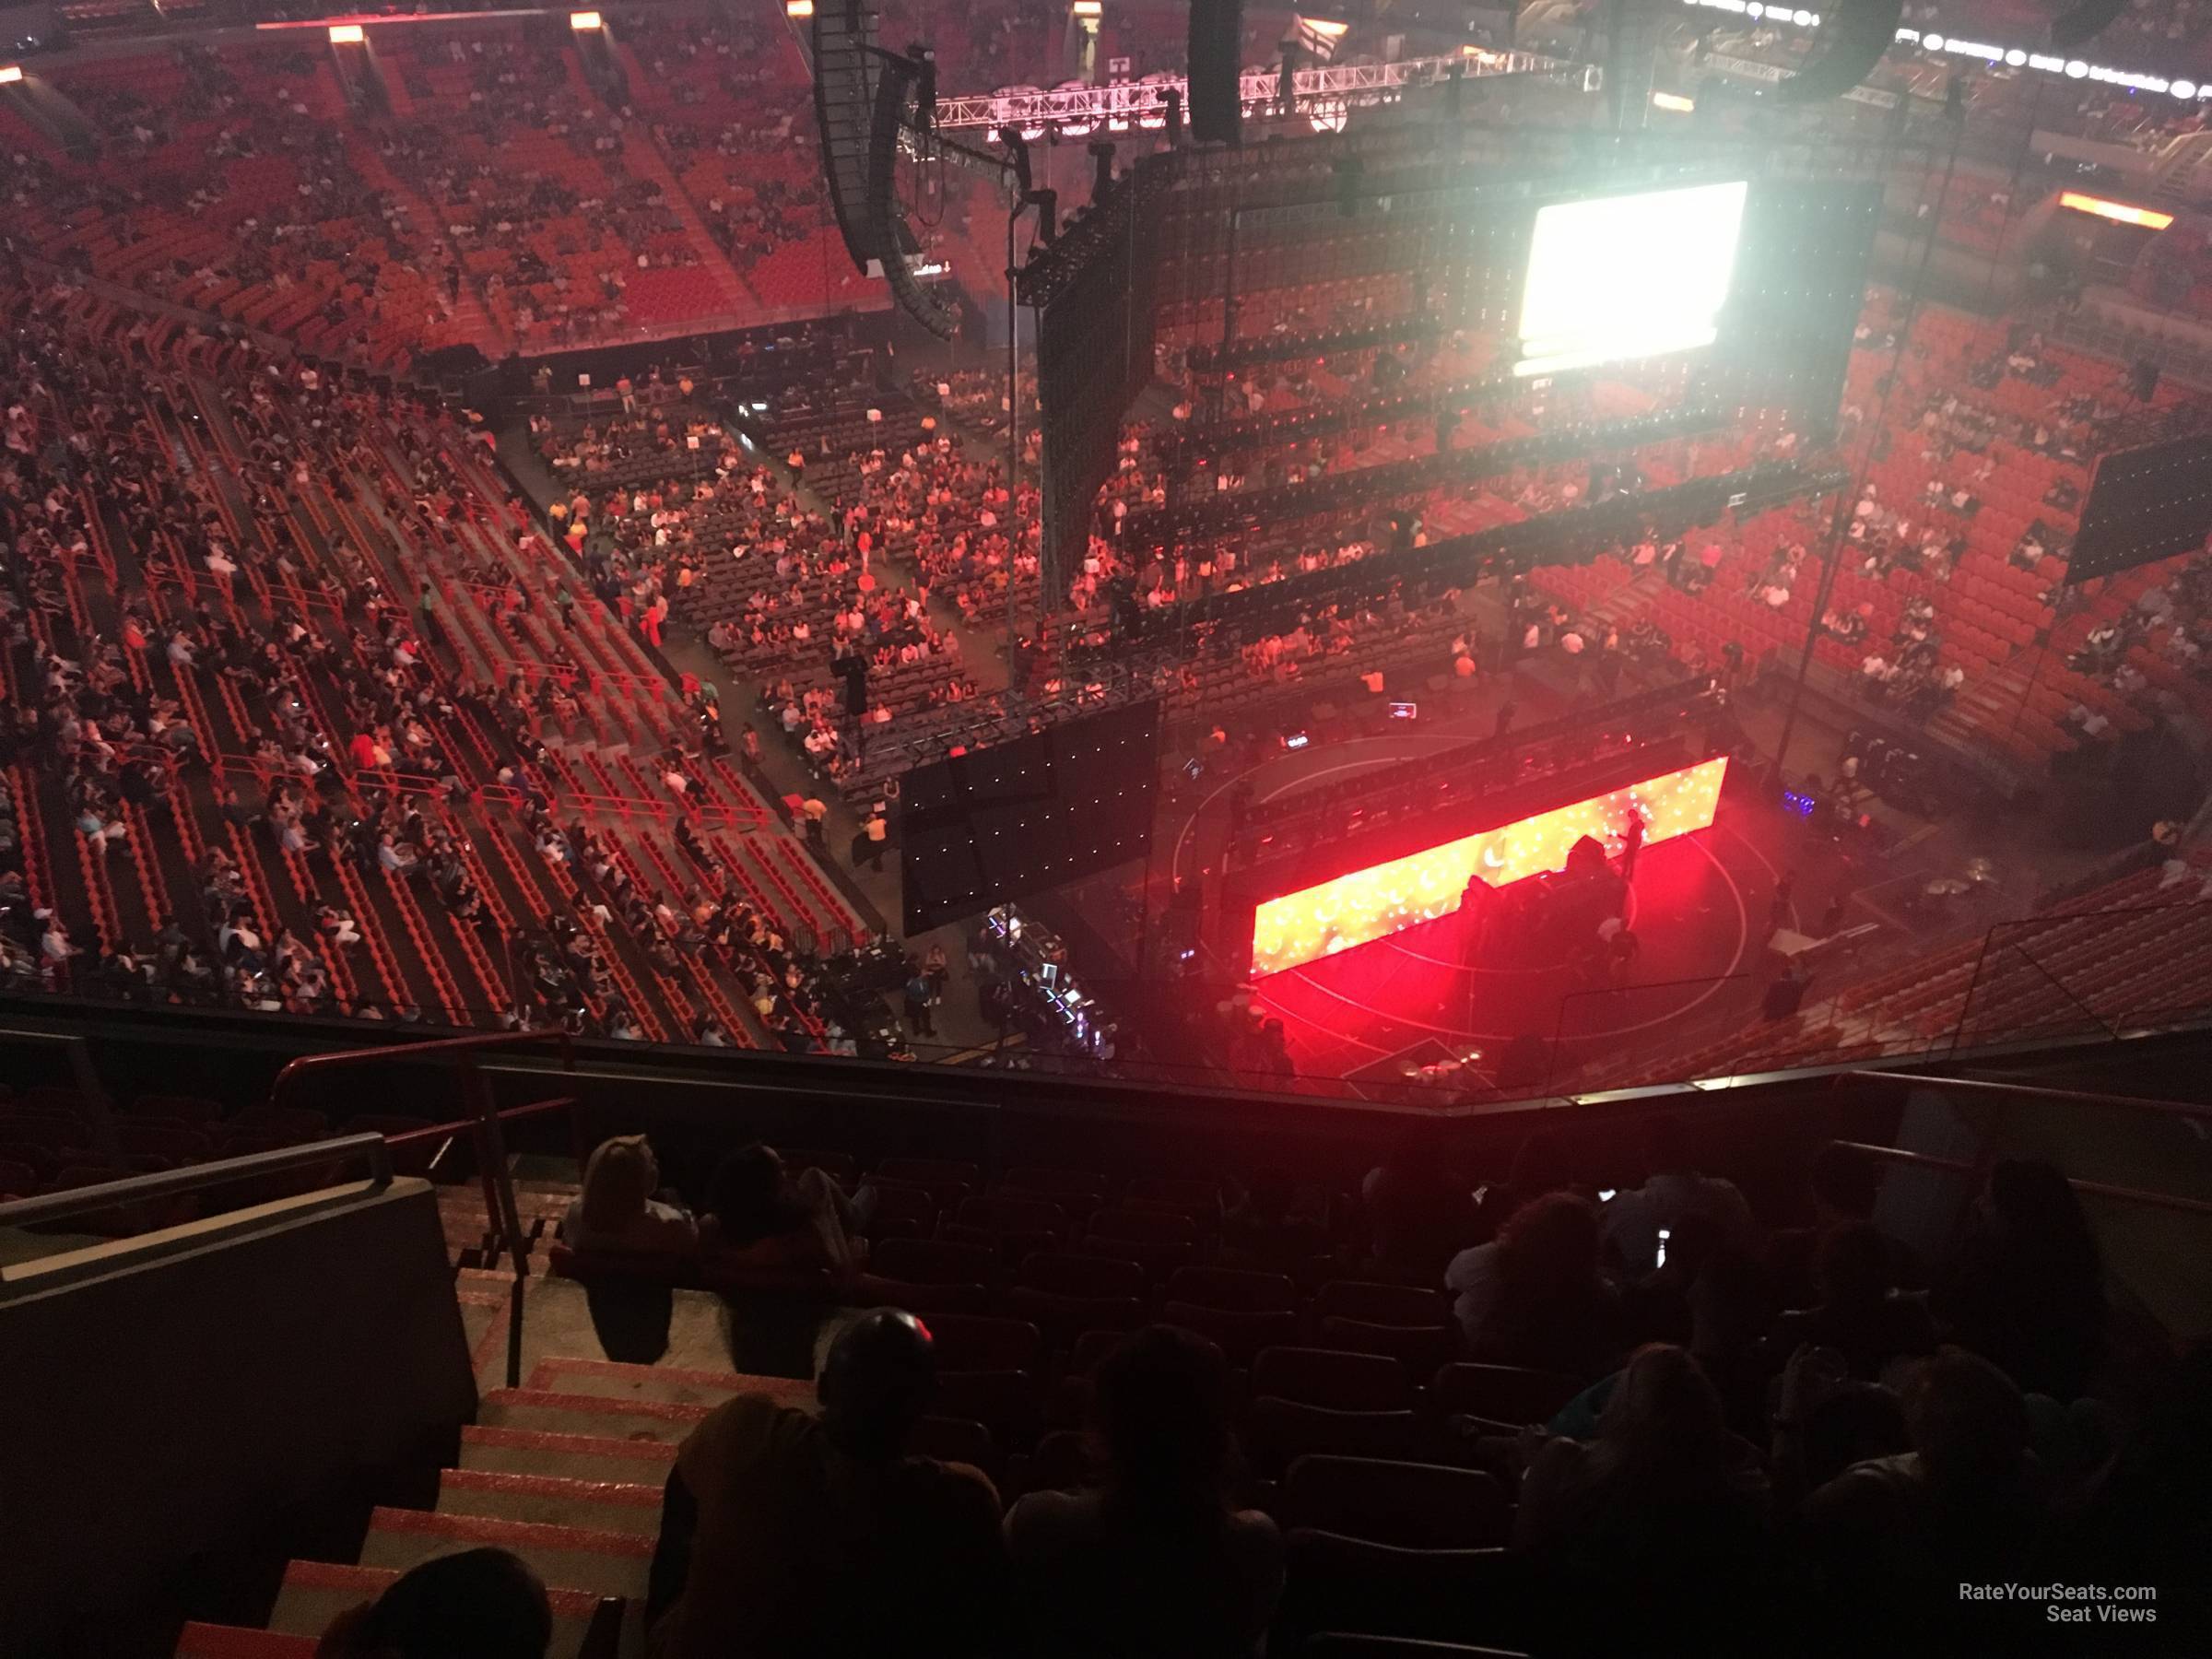 section 408, row 10 seat view  for concert - miami-dade arena